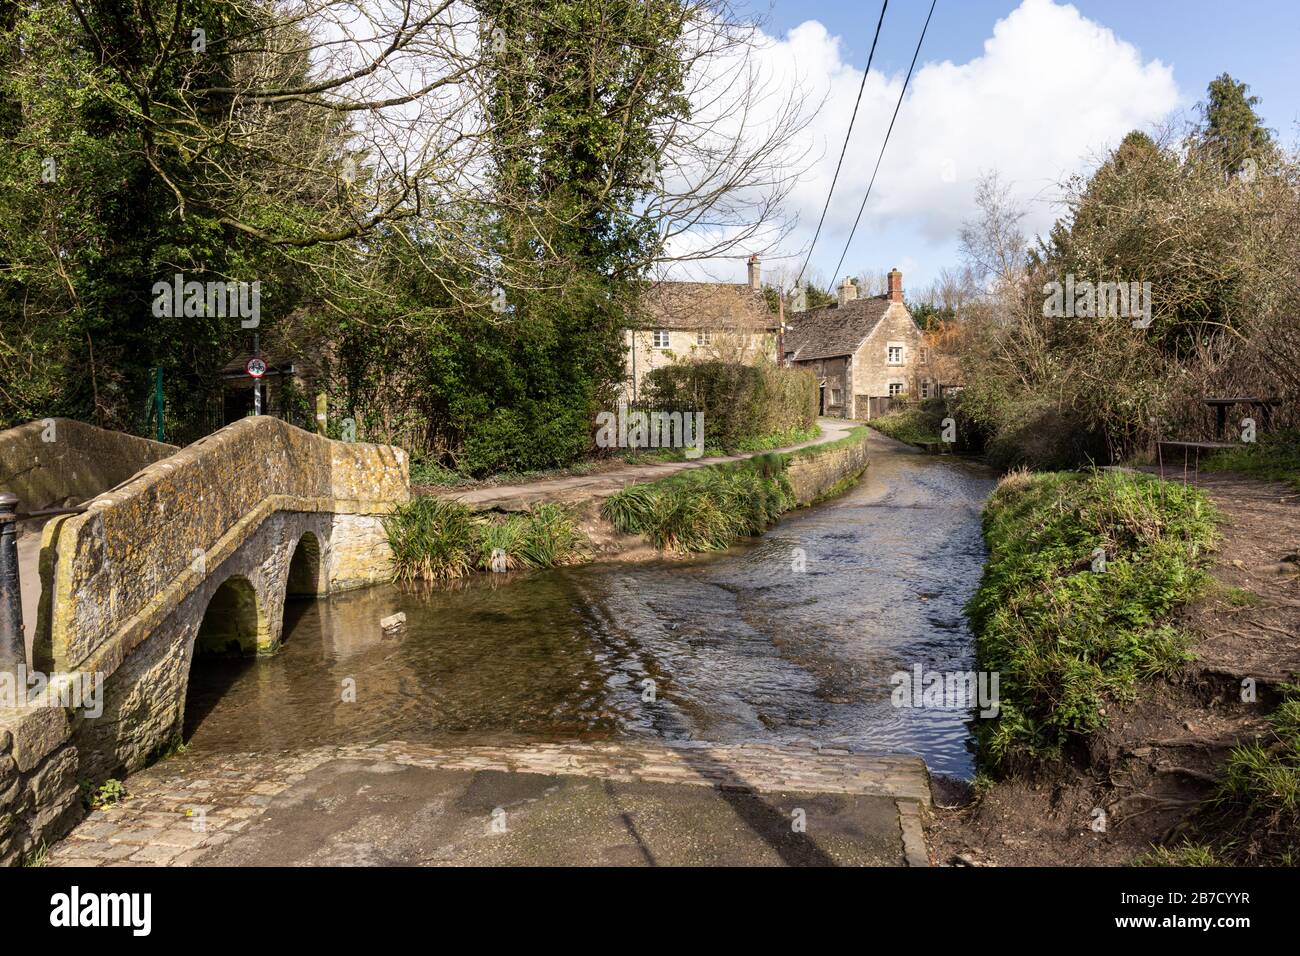 The packhorse bridge over Byde Brook / Bide Brook ford in the picturesque village of Lacock, Wiltshire, England, UK Stock Photo